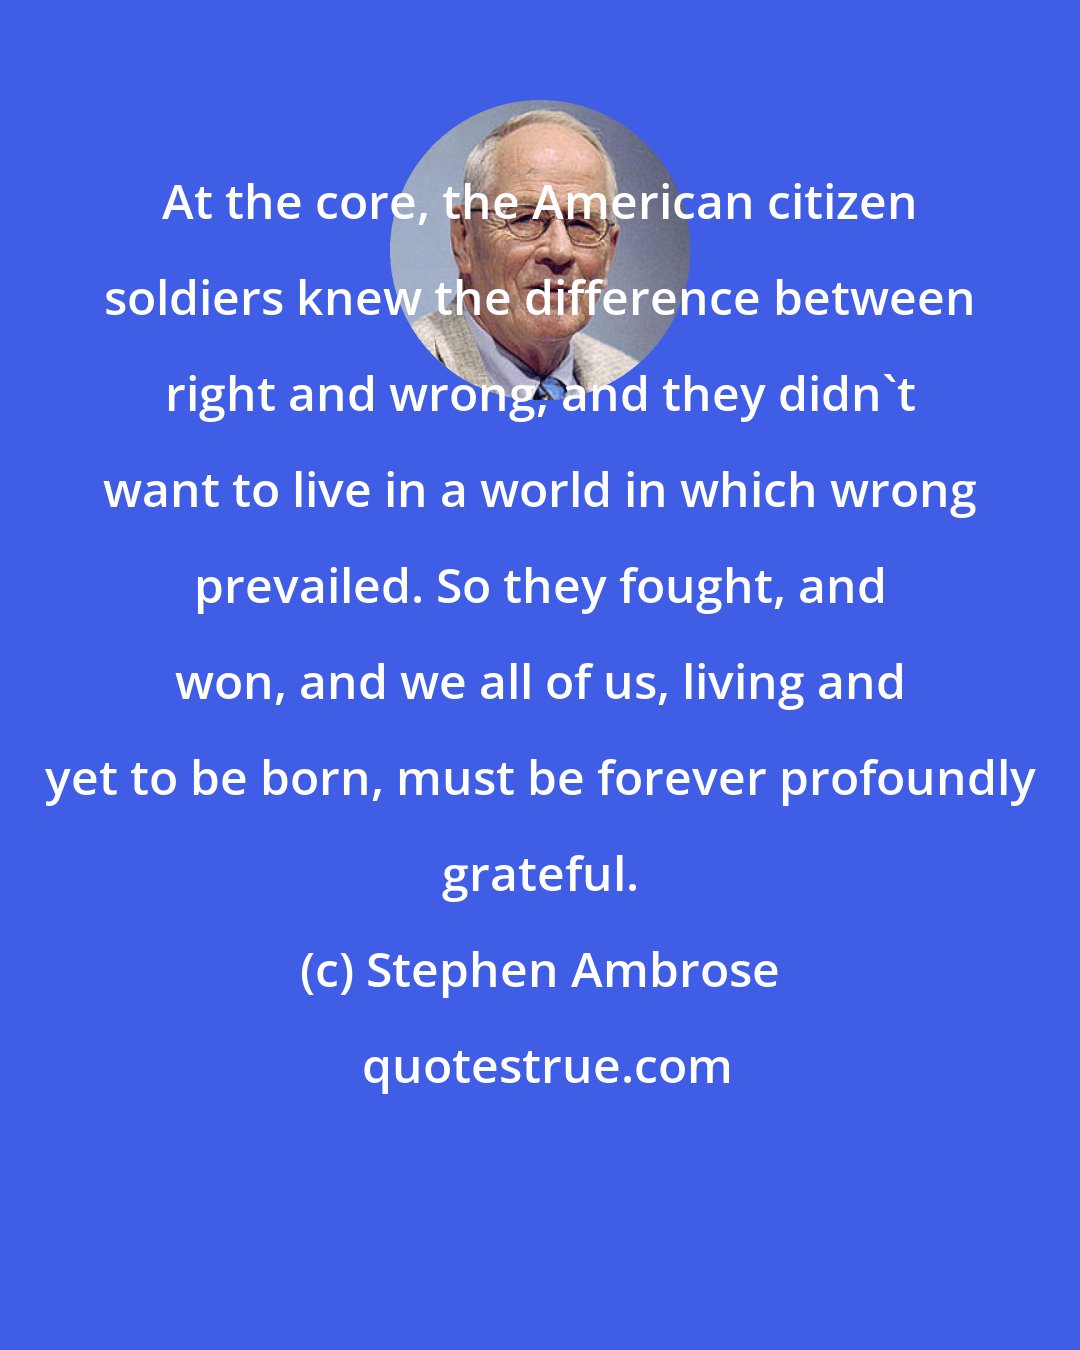 Stephen Ambrose: At the core, the American citizen soldiers knew the difference between right and wrong, and they didn't want to live in a world in which wrong prevailed. So they fought, and won, and we all of us, living and yet to be born, must be forever profoundly grateful.